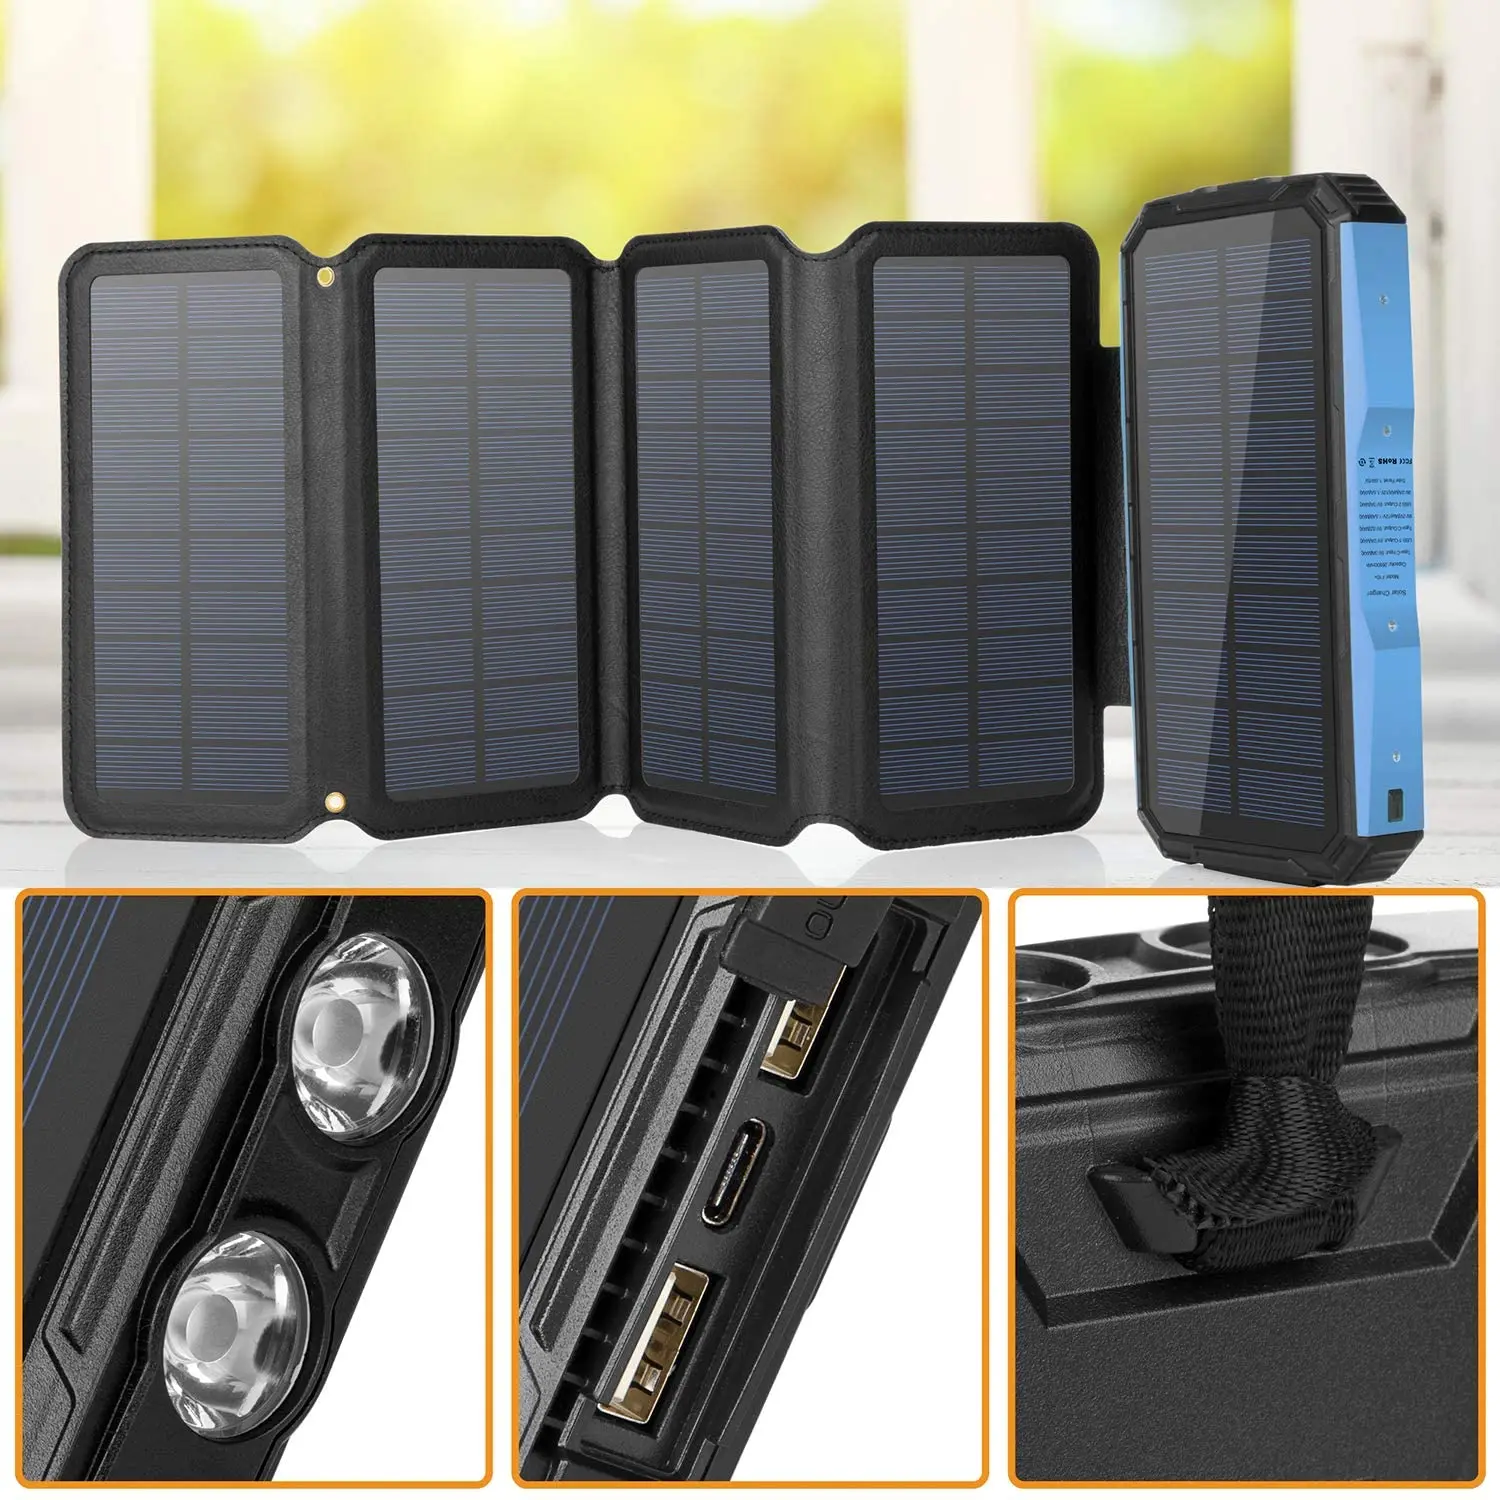 solar charger 26800mah 5 panels 7 5w high efficiency with ultra bright 60 led panel light and flashlight pd portable power ban free global shipping